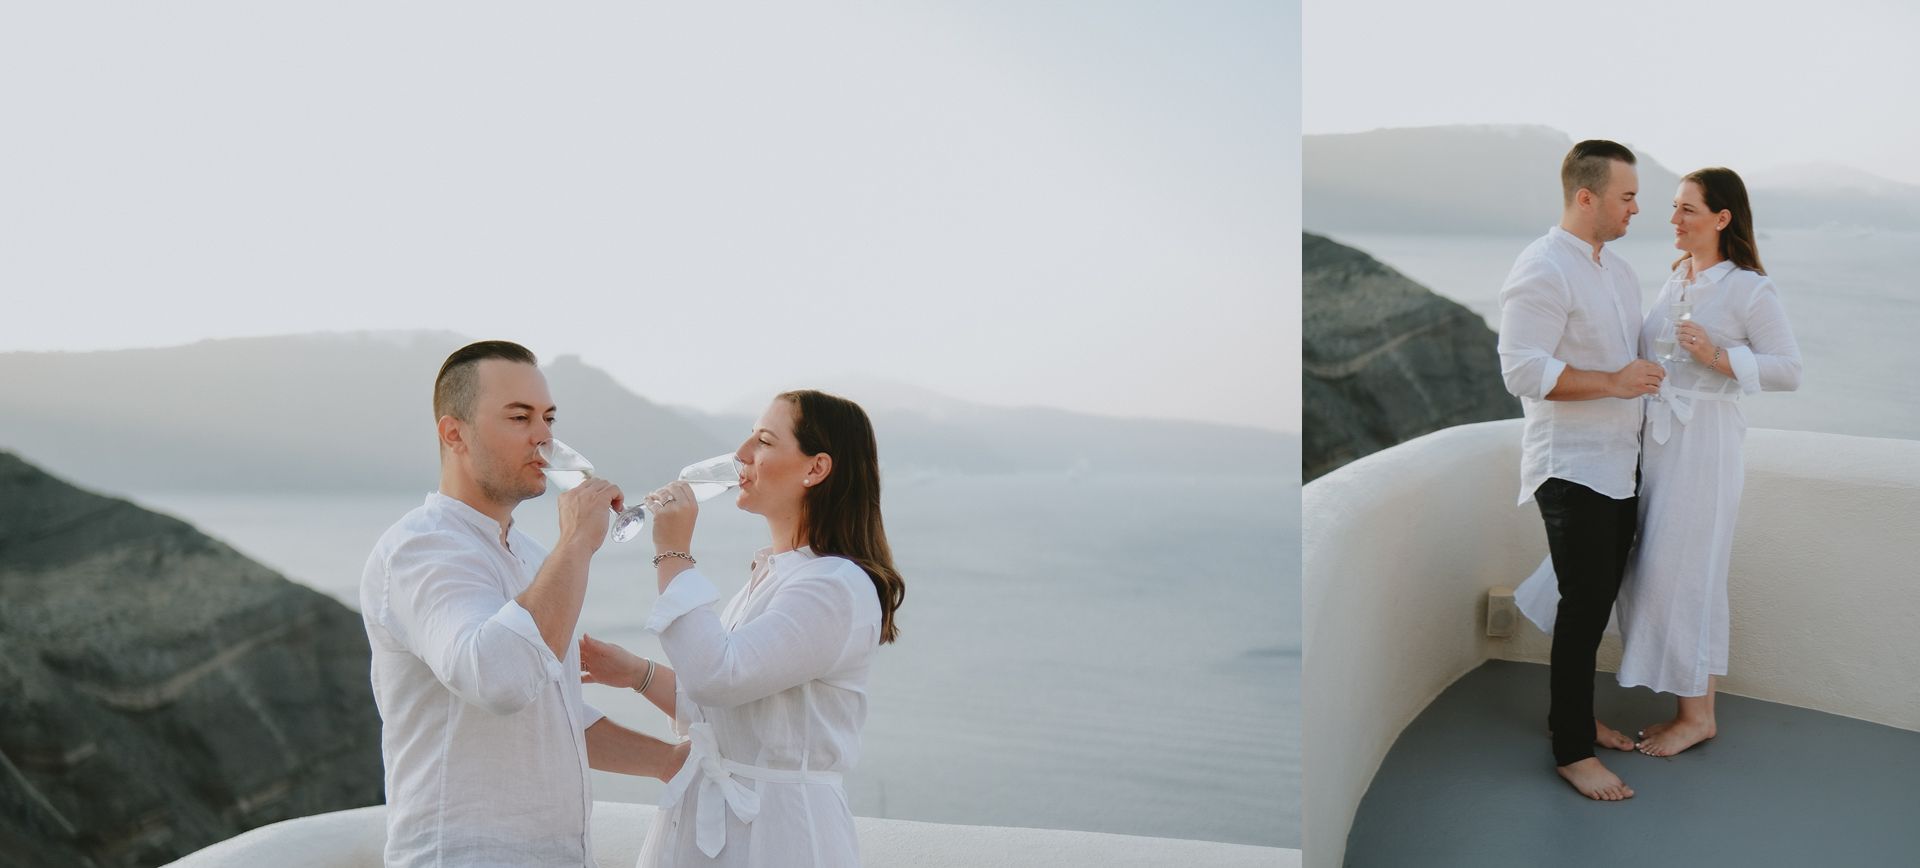 Greece Adventure Wedding Elope to Santorini with a Cliffside Terrace Ceremony Dinner